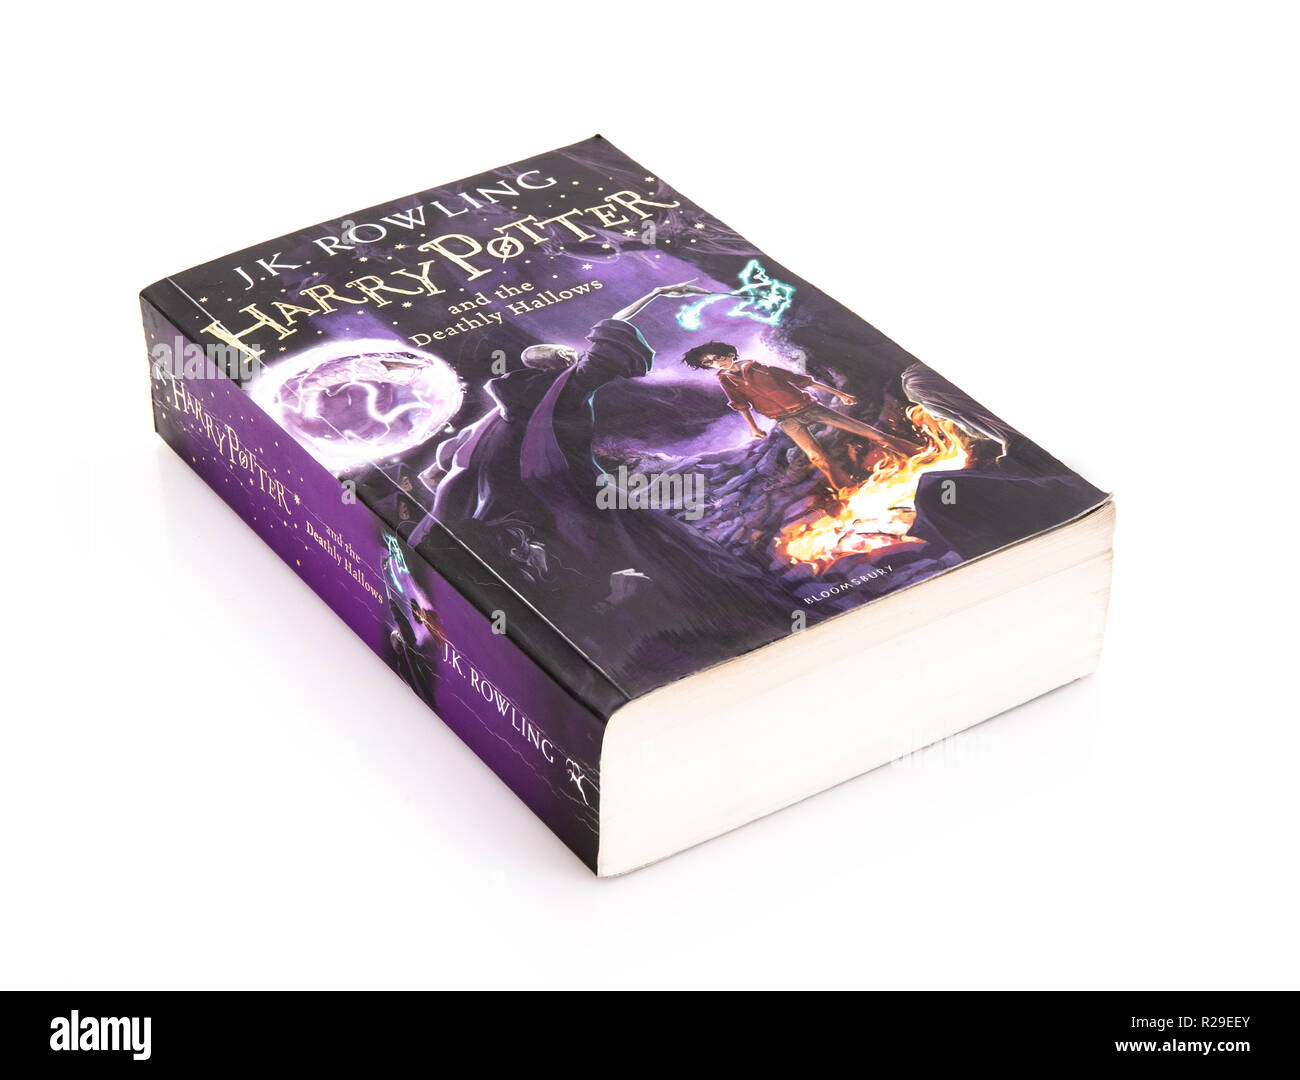 SWINDON, UK - NOVEMBER 18, 2018: Harry Potter And The Deathly Hallows Paperback Edition on a white background Stock Photo